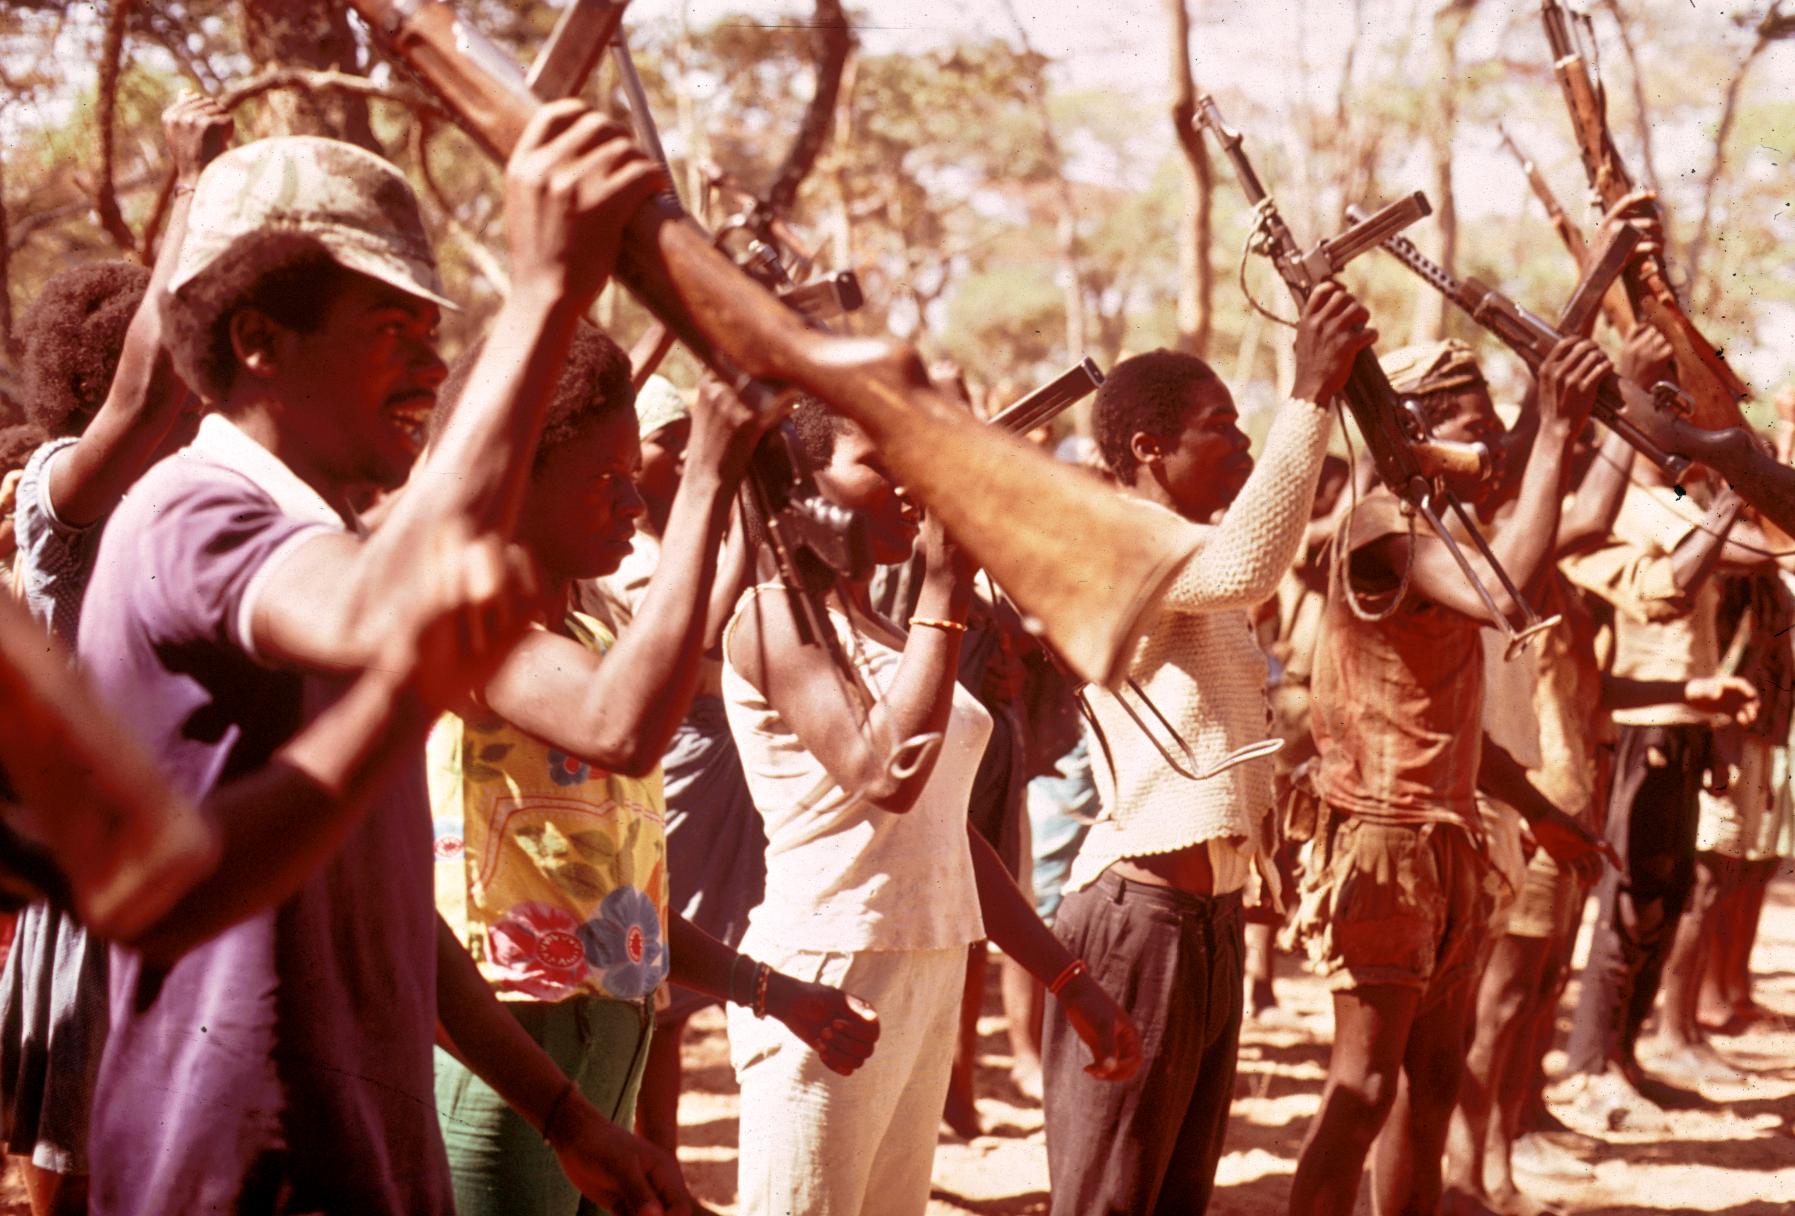 Recruits in the Popular Resistance Movement for the Liberation of Angola